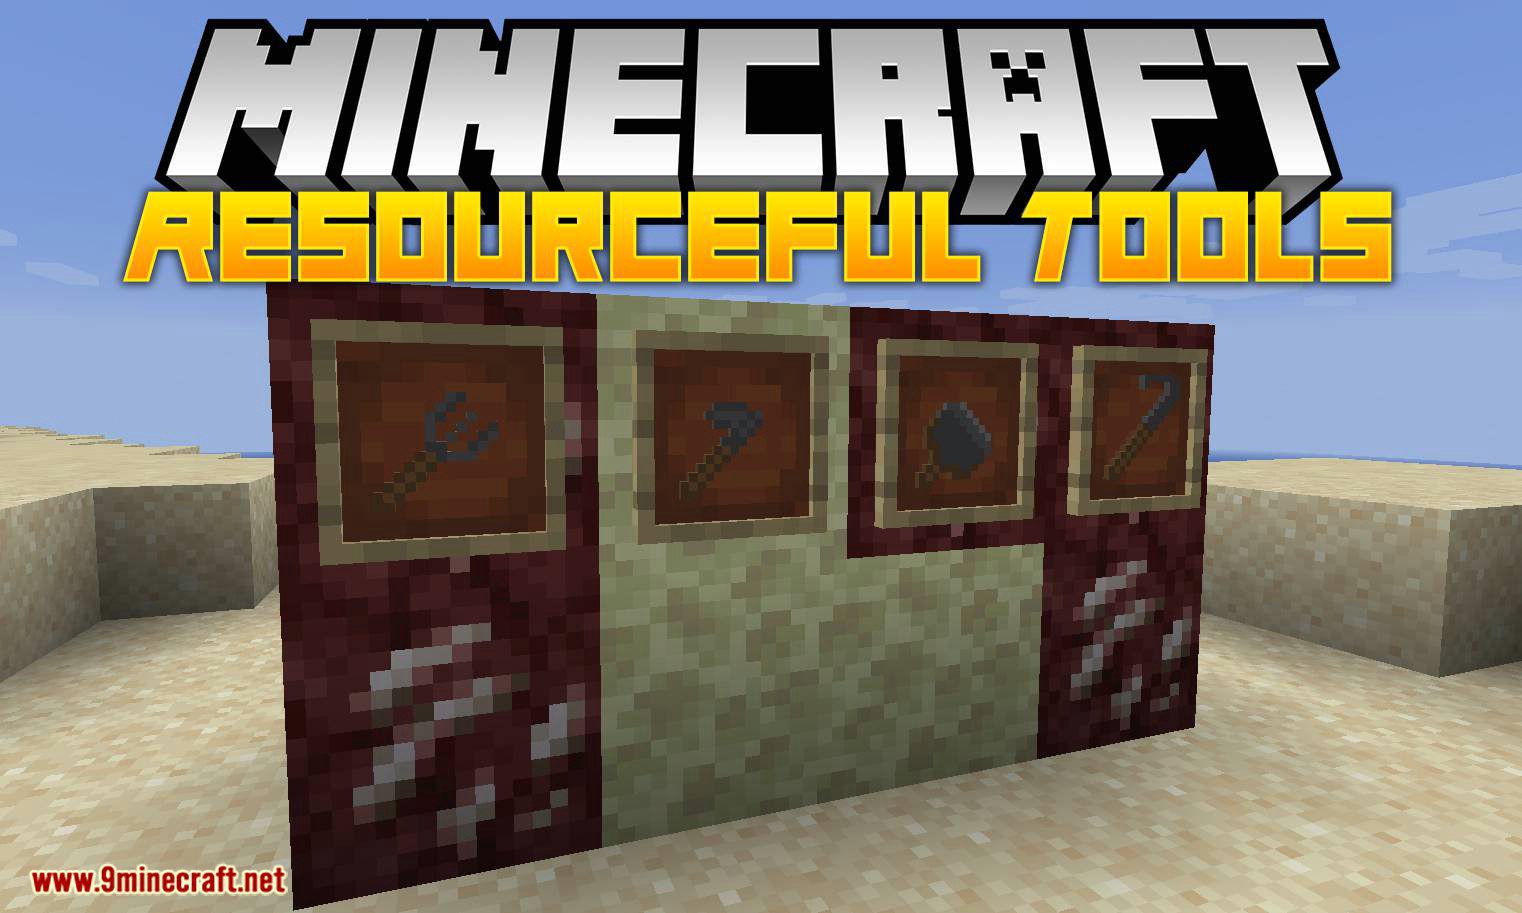 Resourceful Tools Mod (1.19.2, 1.18.2) - Obtain Useful Resources with Greater Ease 1